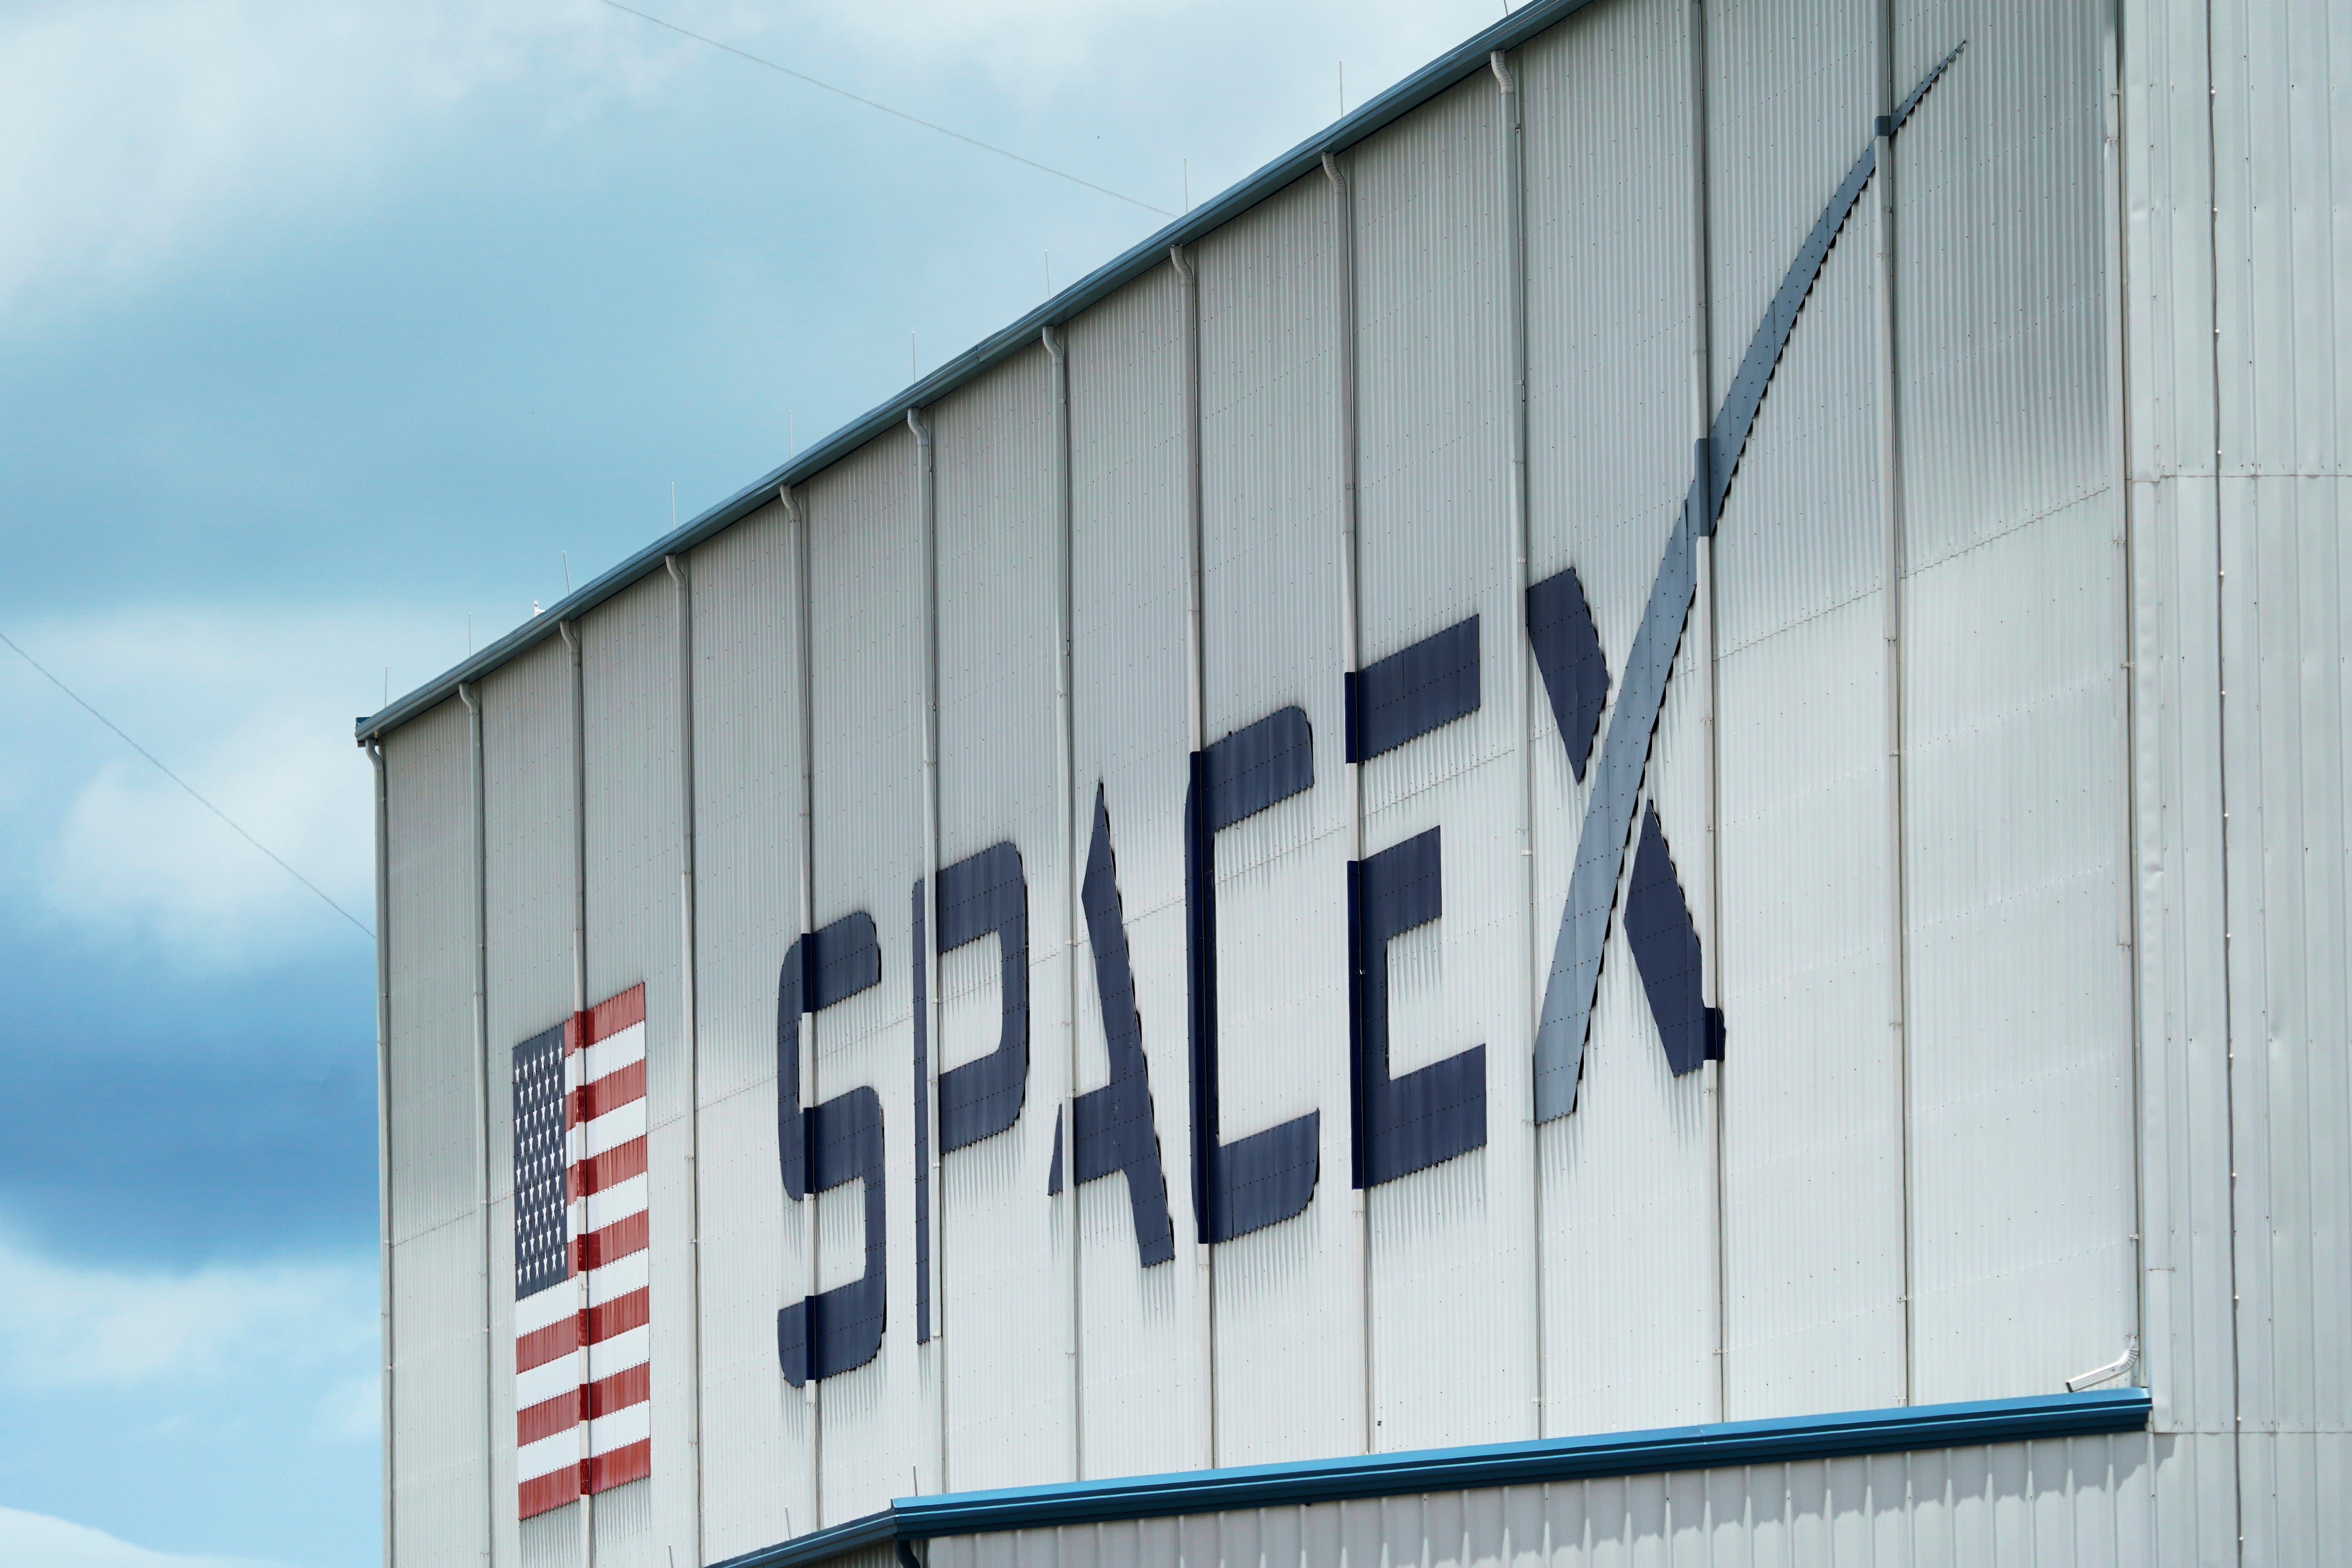 The National Reconnaissance Office awarded a $1.8bn contract to Musk’s SpaceX for the classified project, a planned network of hundreds of satellites, in 2021, according to Reuters